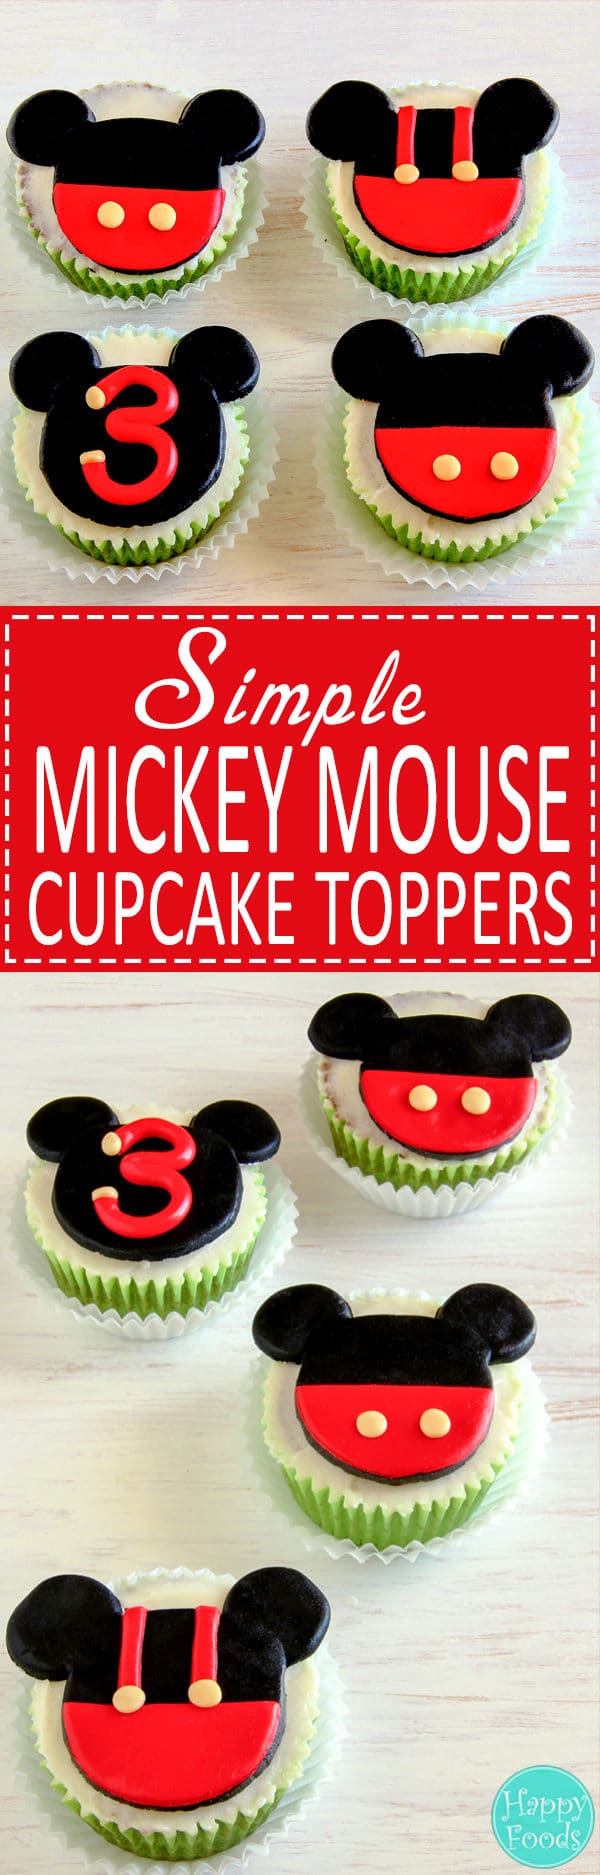 Mickey Mouse Cupcake & Cake Toppers - Super easy fondant cupcake decorating tutorial. Learn how to make simple Disney cake toppers. | happyfoodstube.com